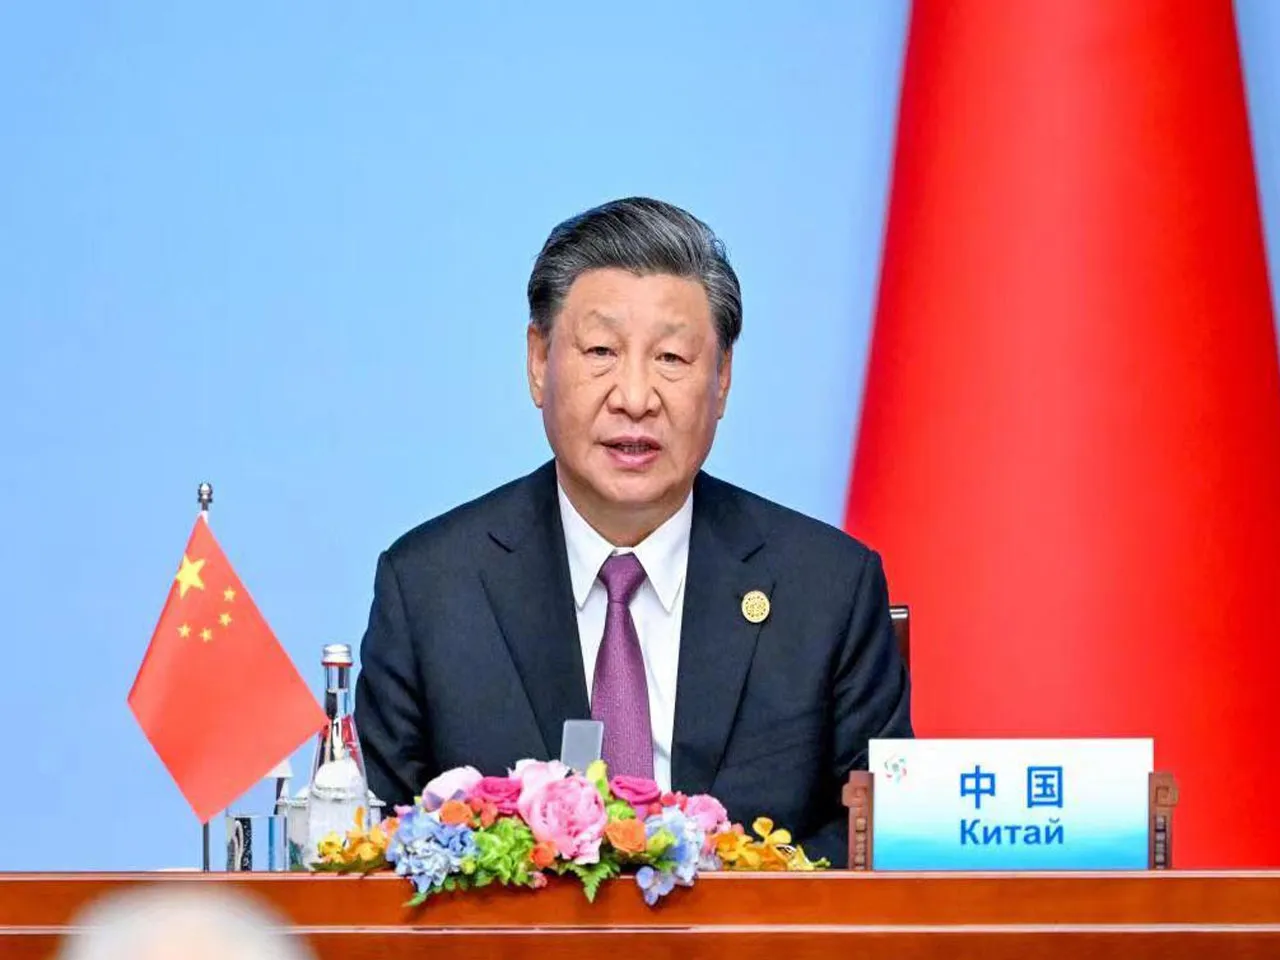 China brings together the countries of Central Asia